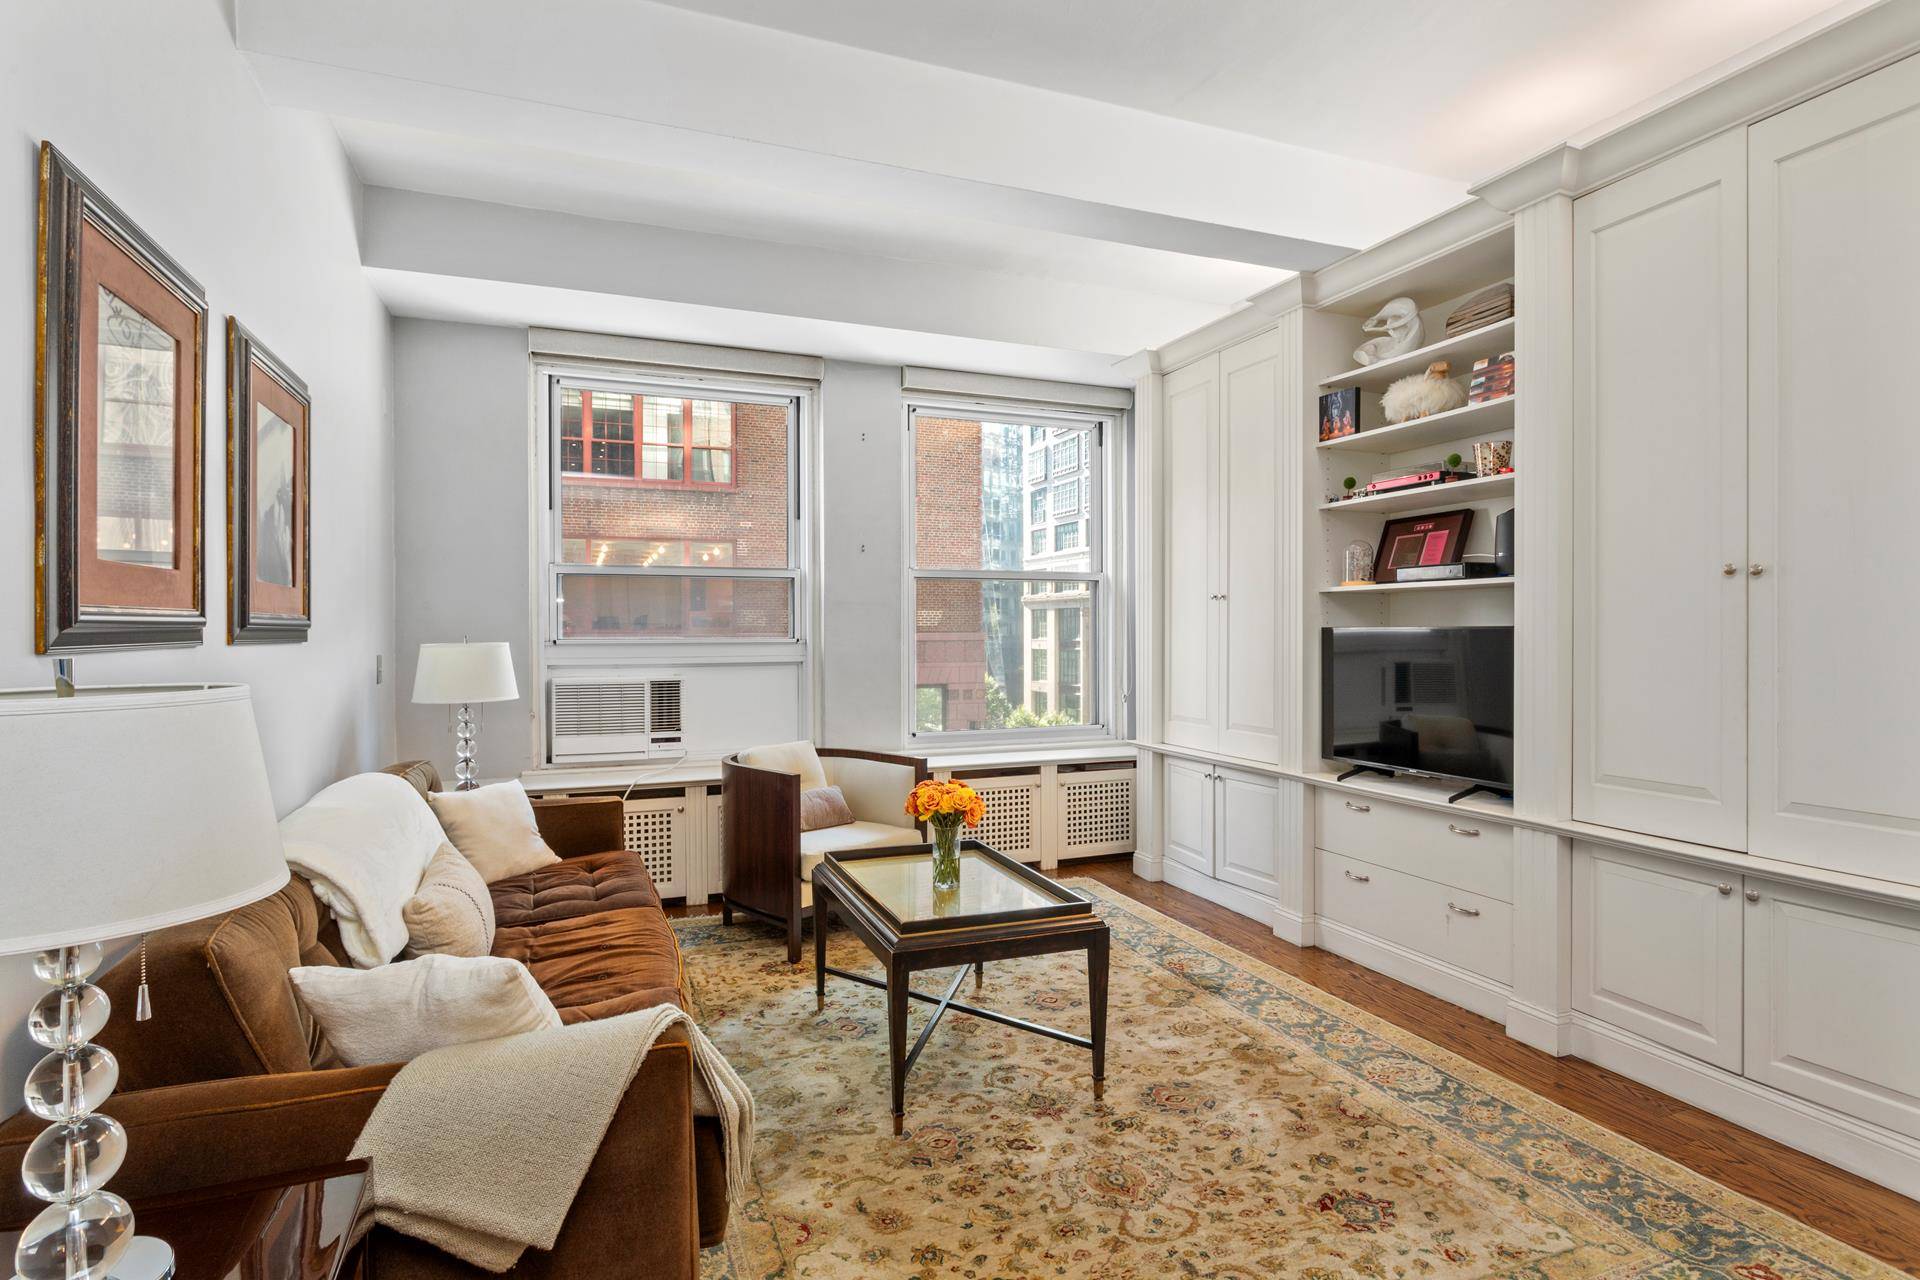 Residence 3C is an expansive one bedroom, one and a half bath apartment with sunny southern exposures and is perfectly situated on Park Avenue South.